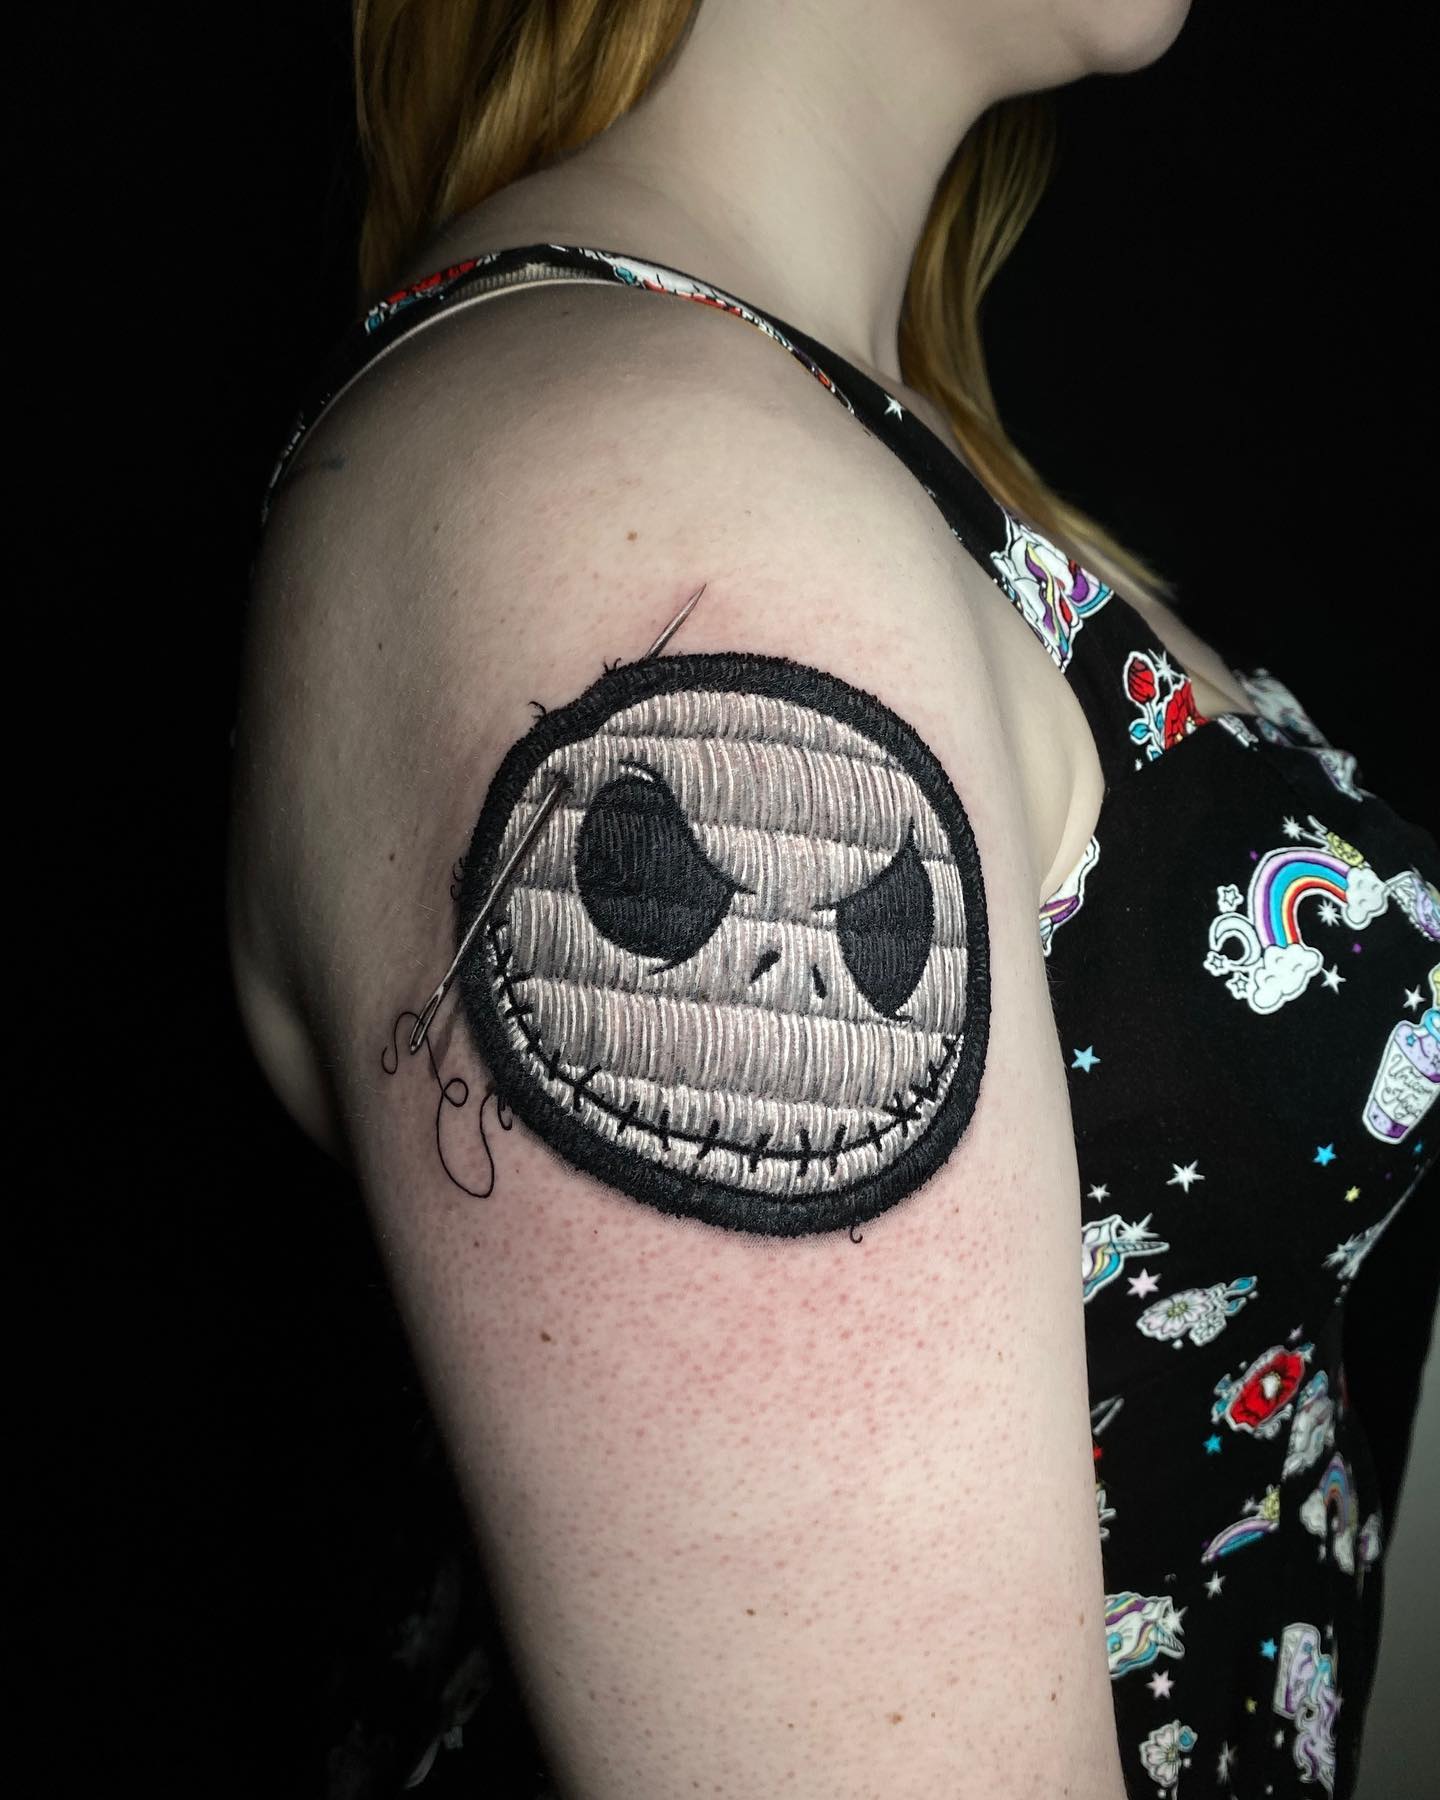 Black and white embroidery stitch tattoo of evil smile